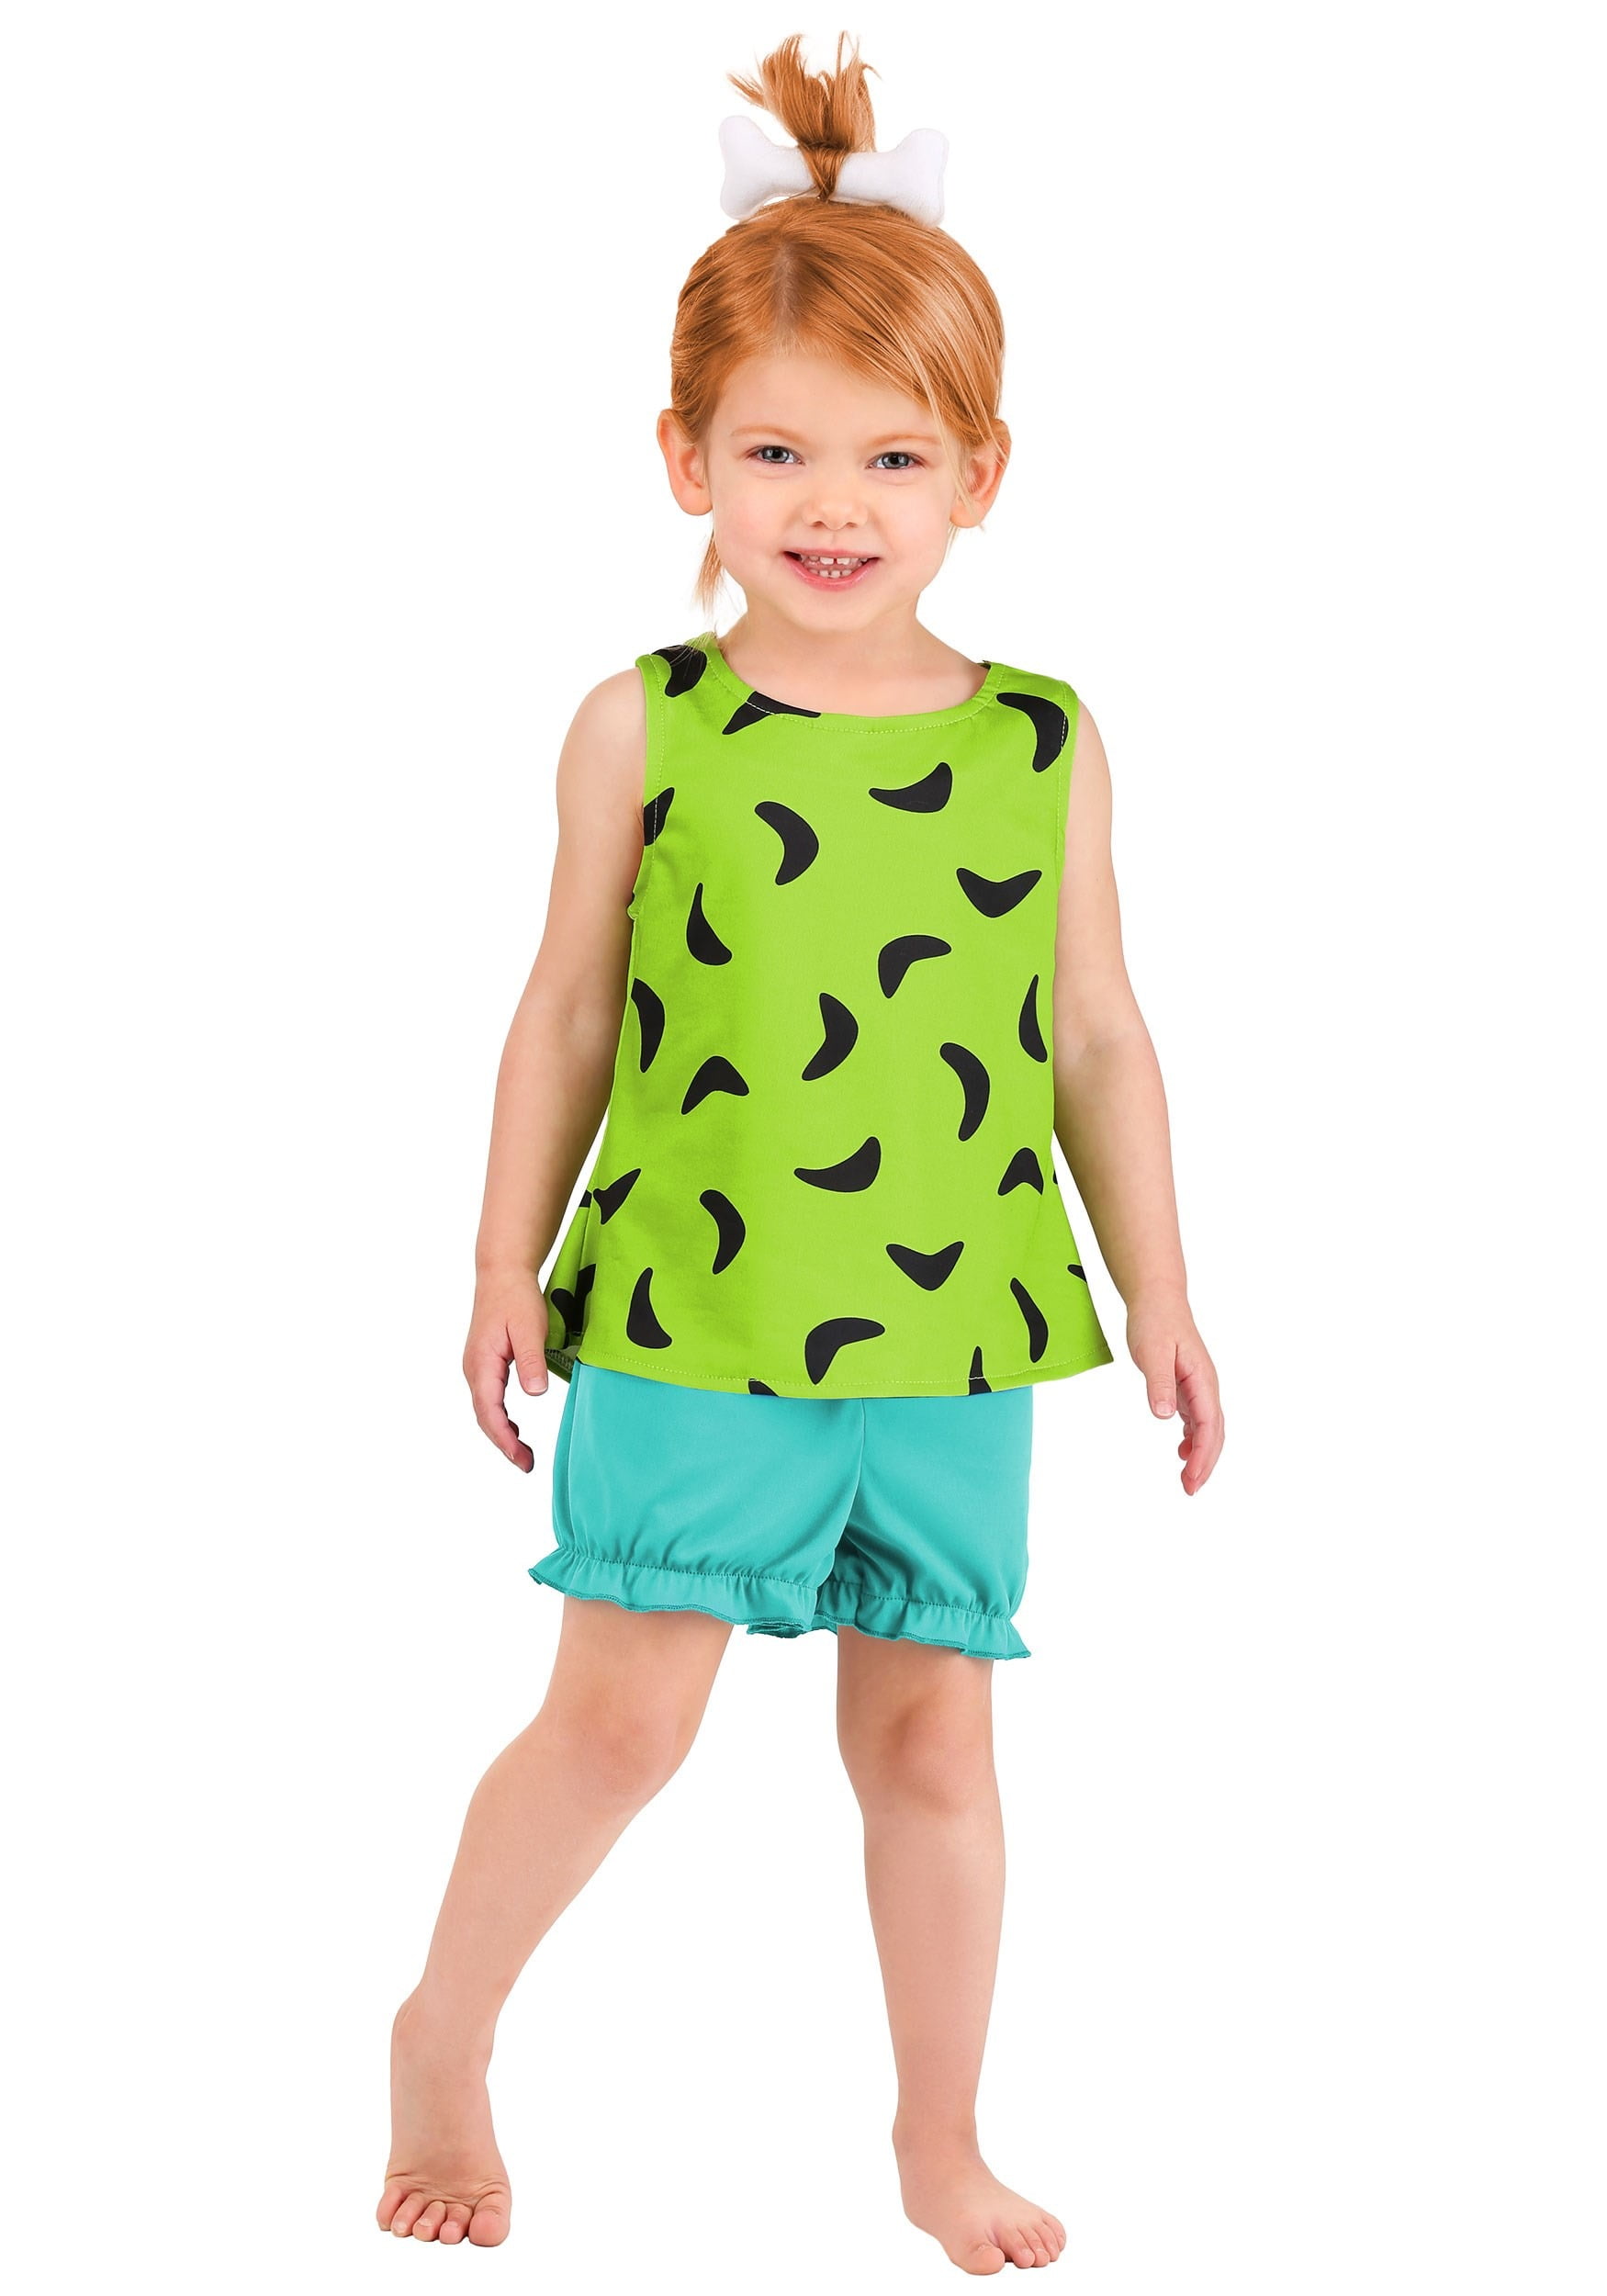 Fred Flintstone costume for toddlers Clothing Boys Clothing Costumes kids and adults 